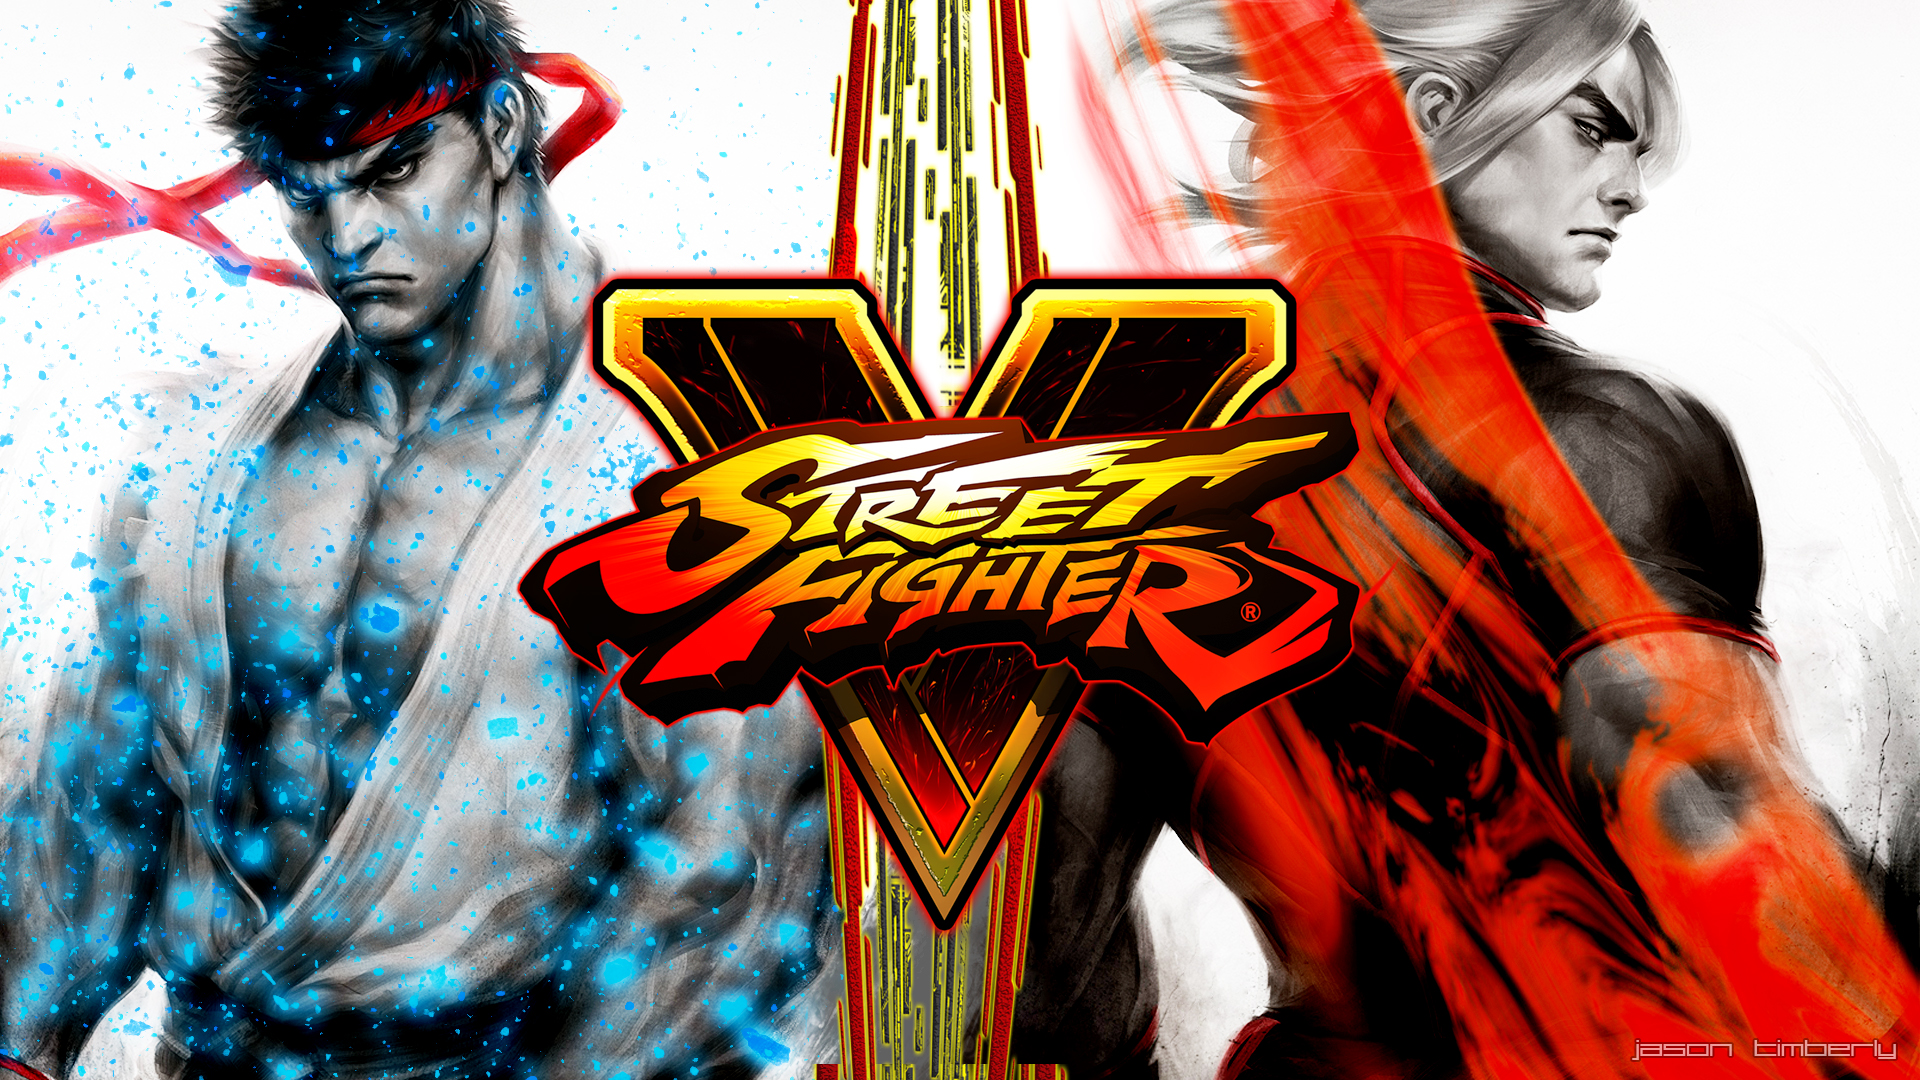 Street Fighter Backgrounds Free Download